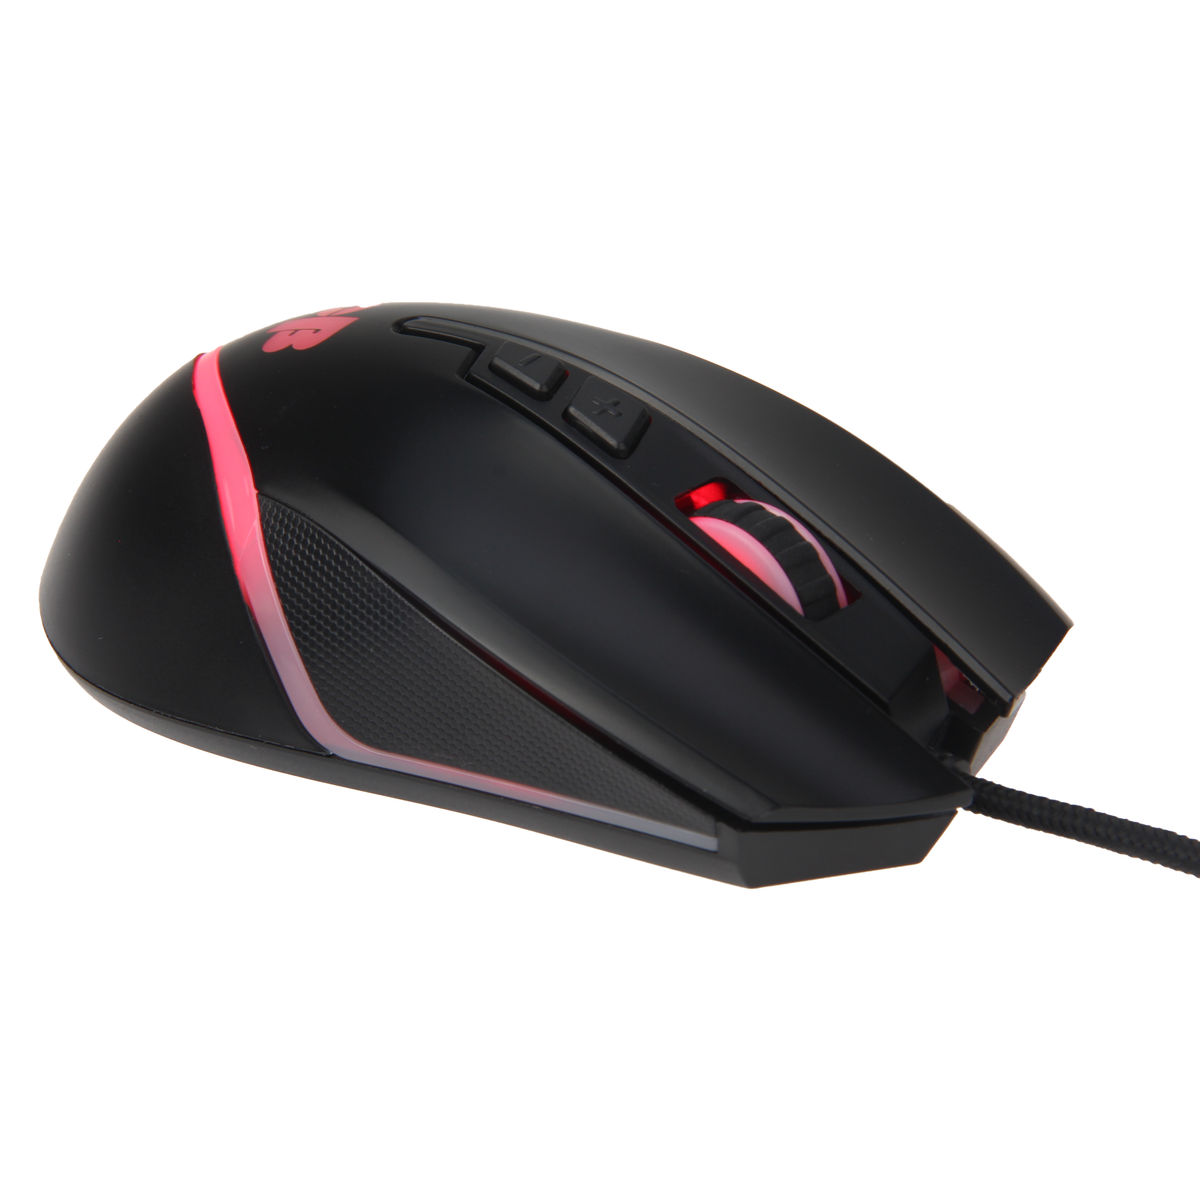 Cosmic Byte CB-M-08 Lightning 3200DPI Gaming Mouse with Software and LED